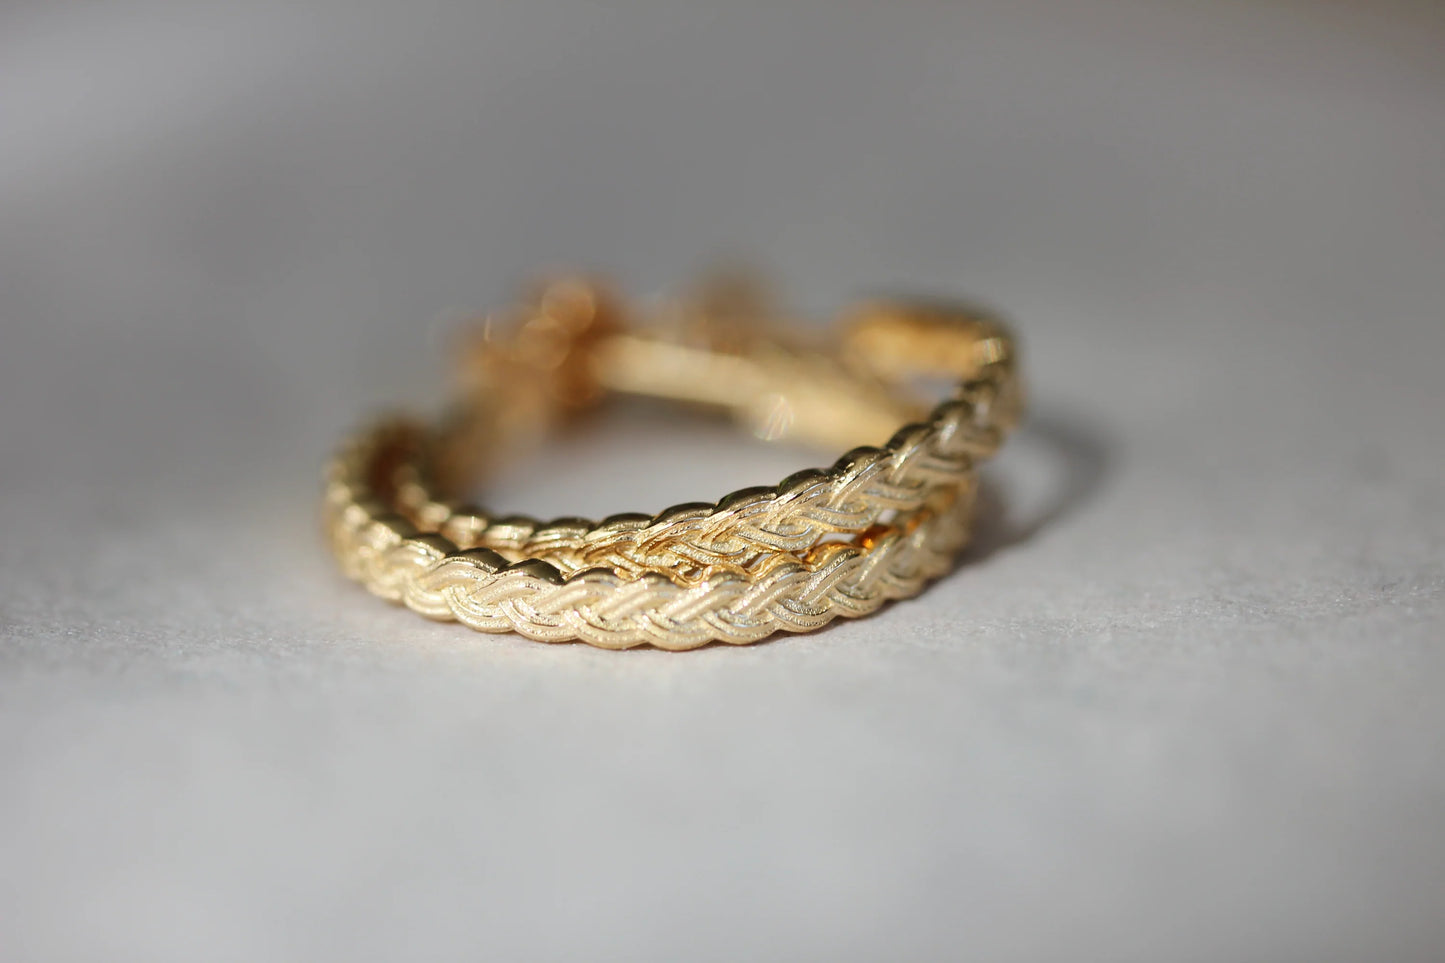 Little Gold Seagrass Hoops